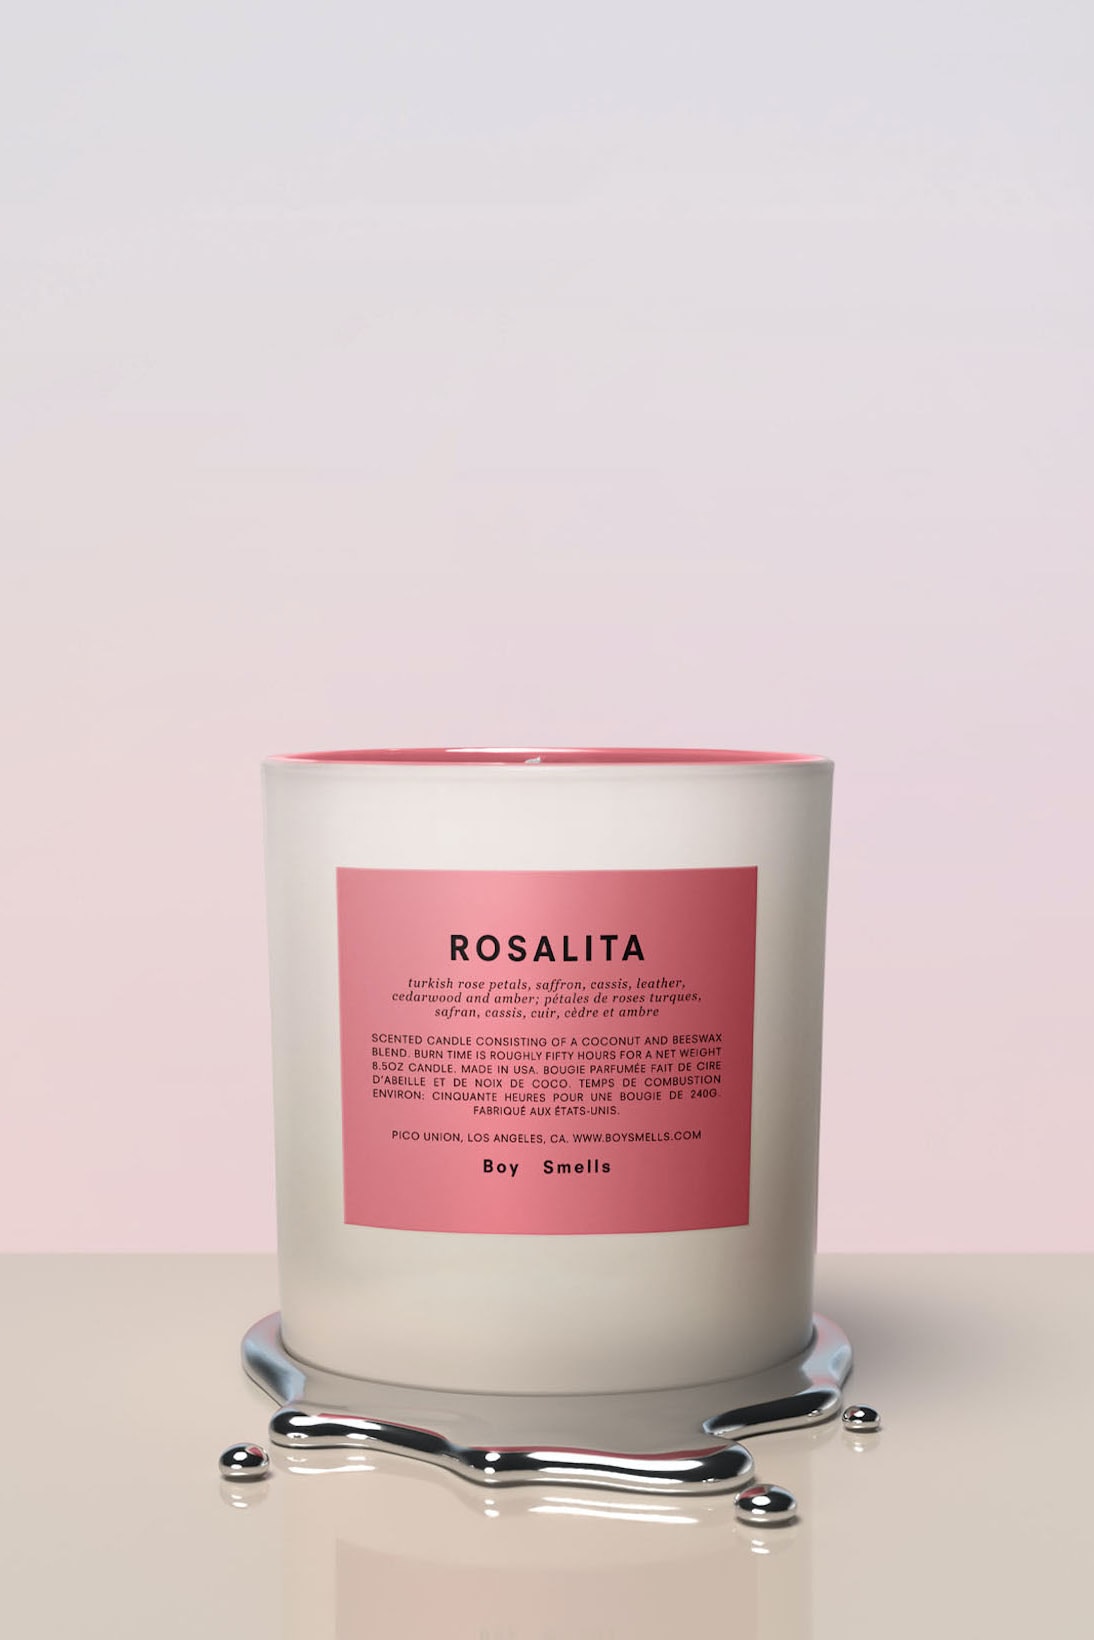 Boy Smells Pride Radiance Collection Candles Rosalita